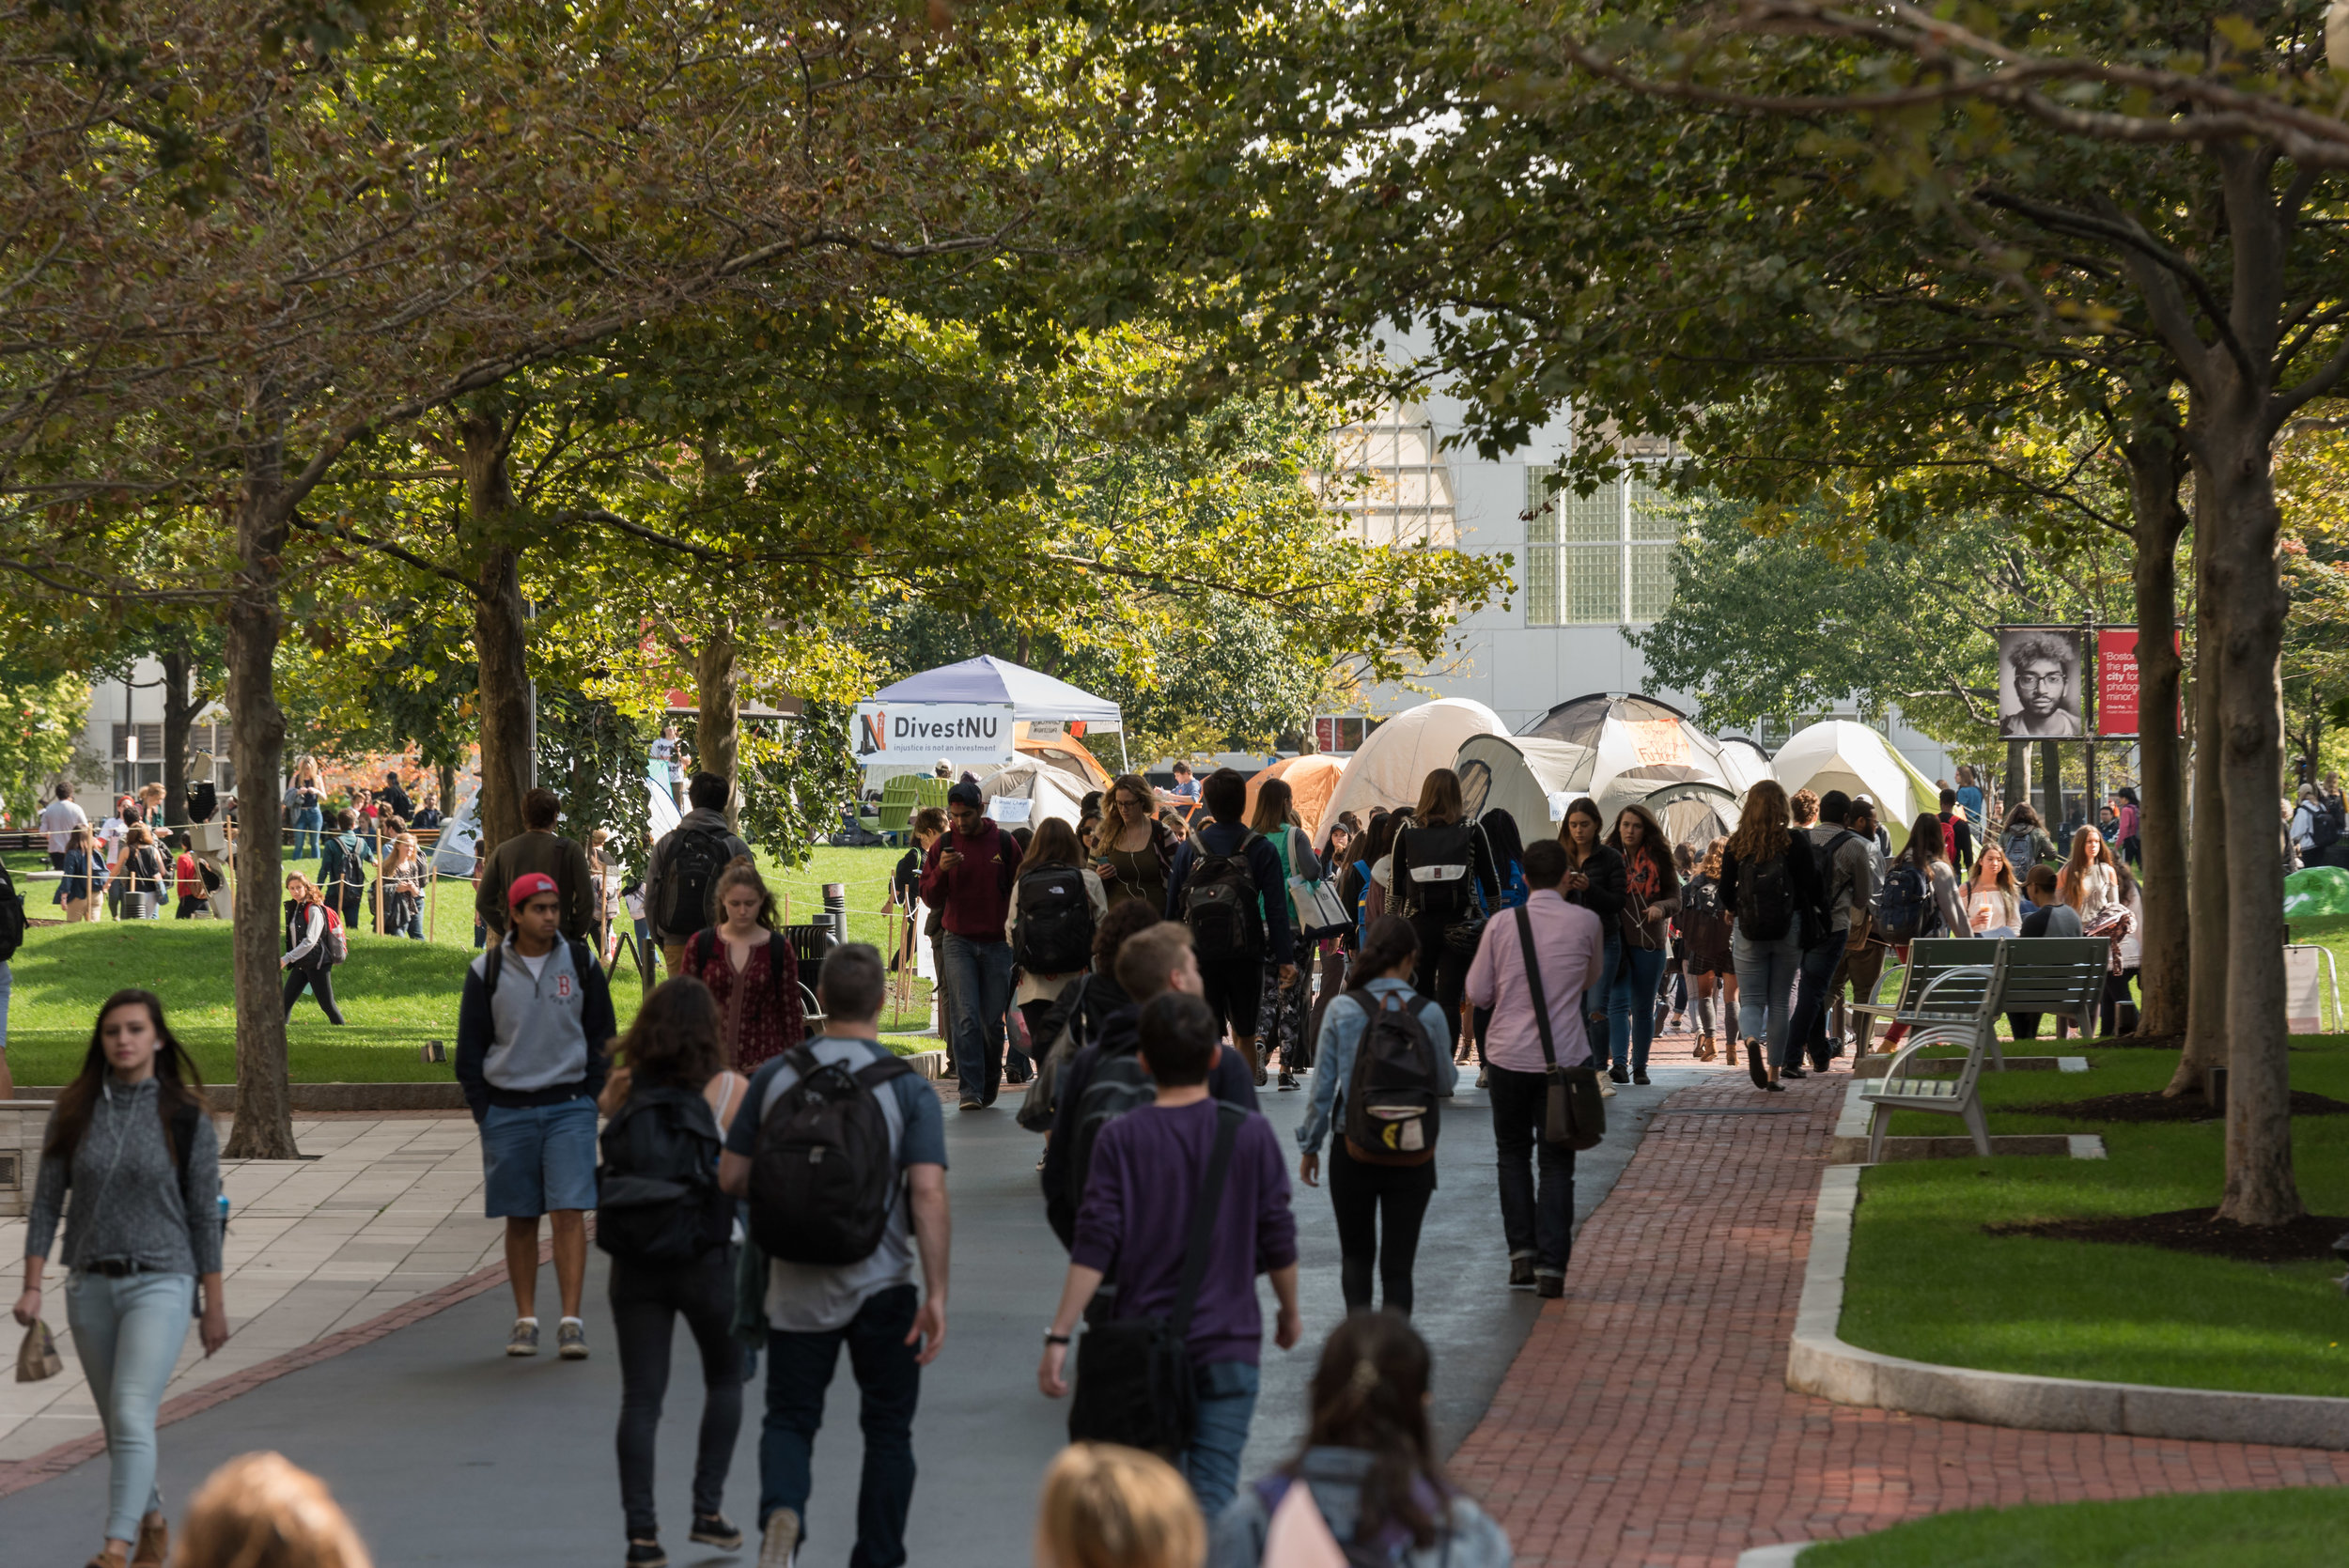  DivestNU tents are posted in Centennial Common on Monday, Oct. 3. The student group coalition began their protest earlier that day asking the University to remove its investments in the fossil fuel industry. 